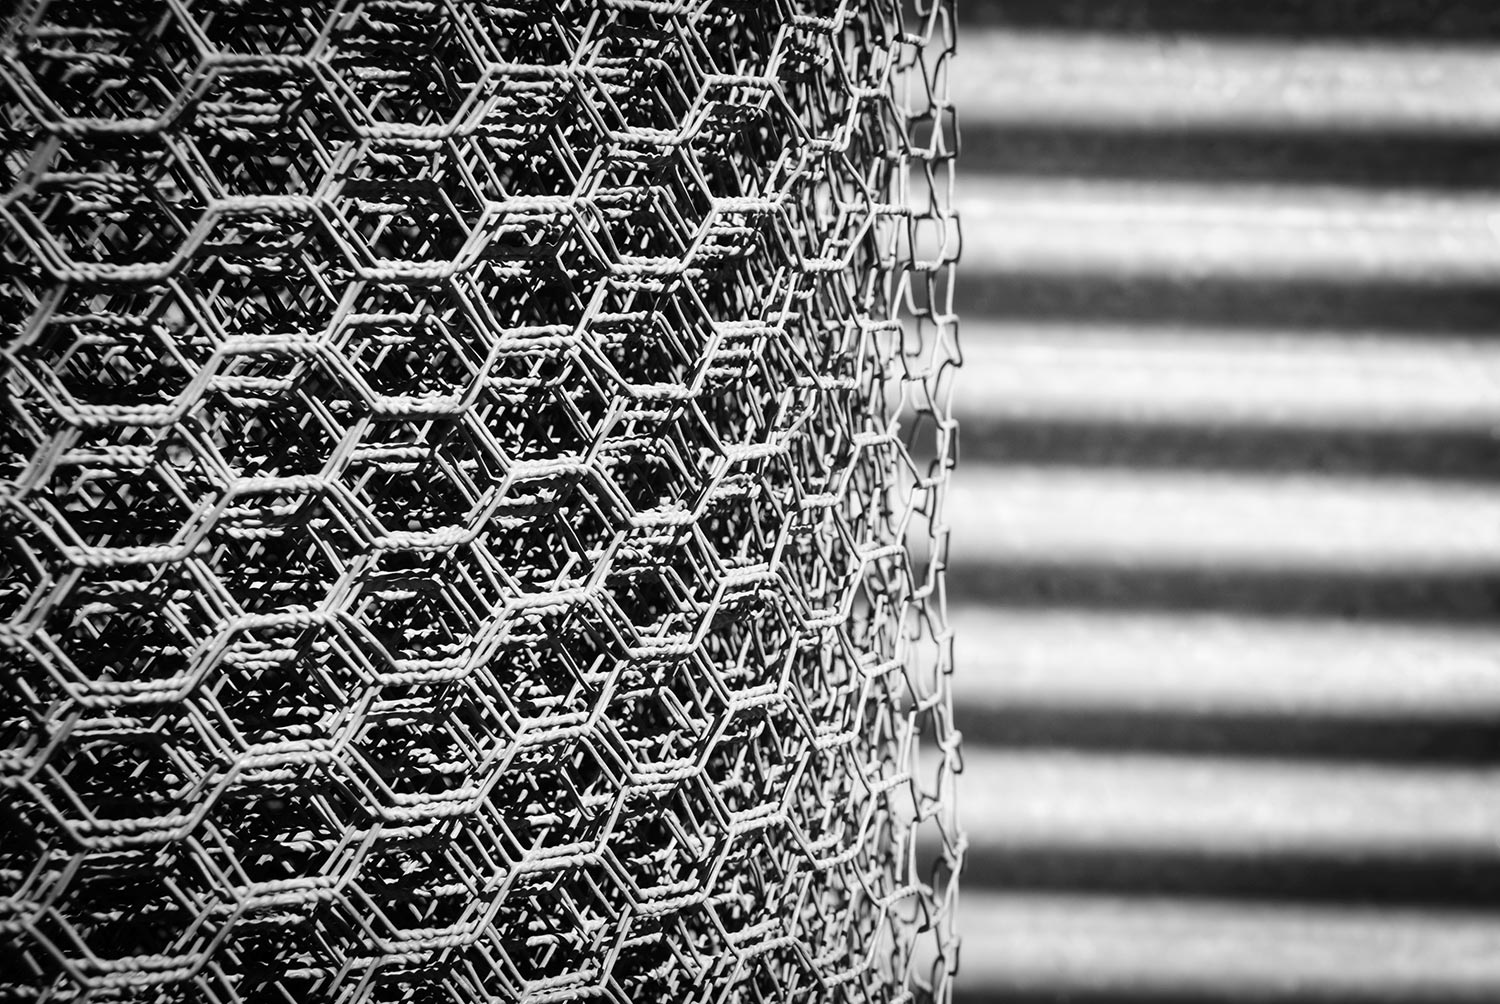 Chicken wire in front of a galvanized sheet metal